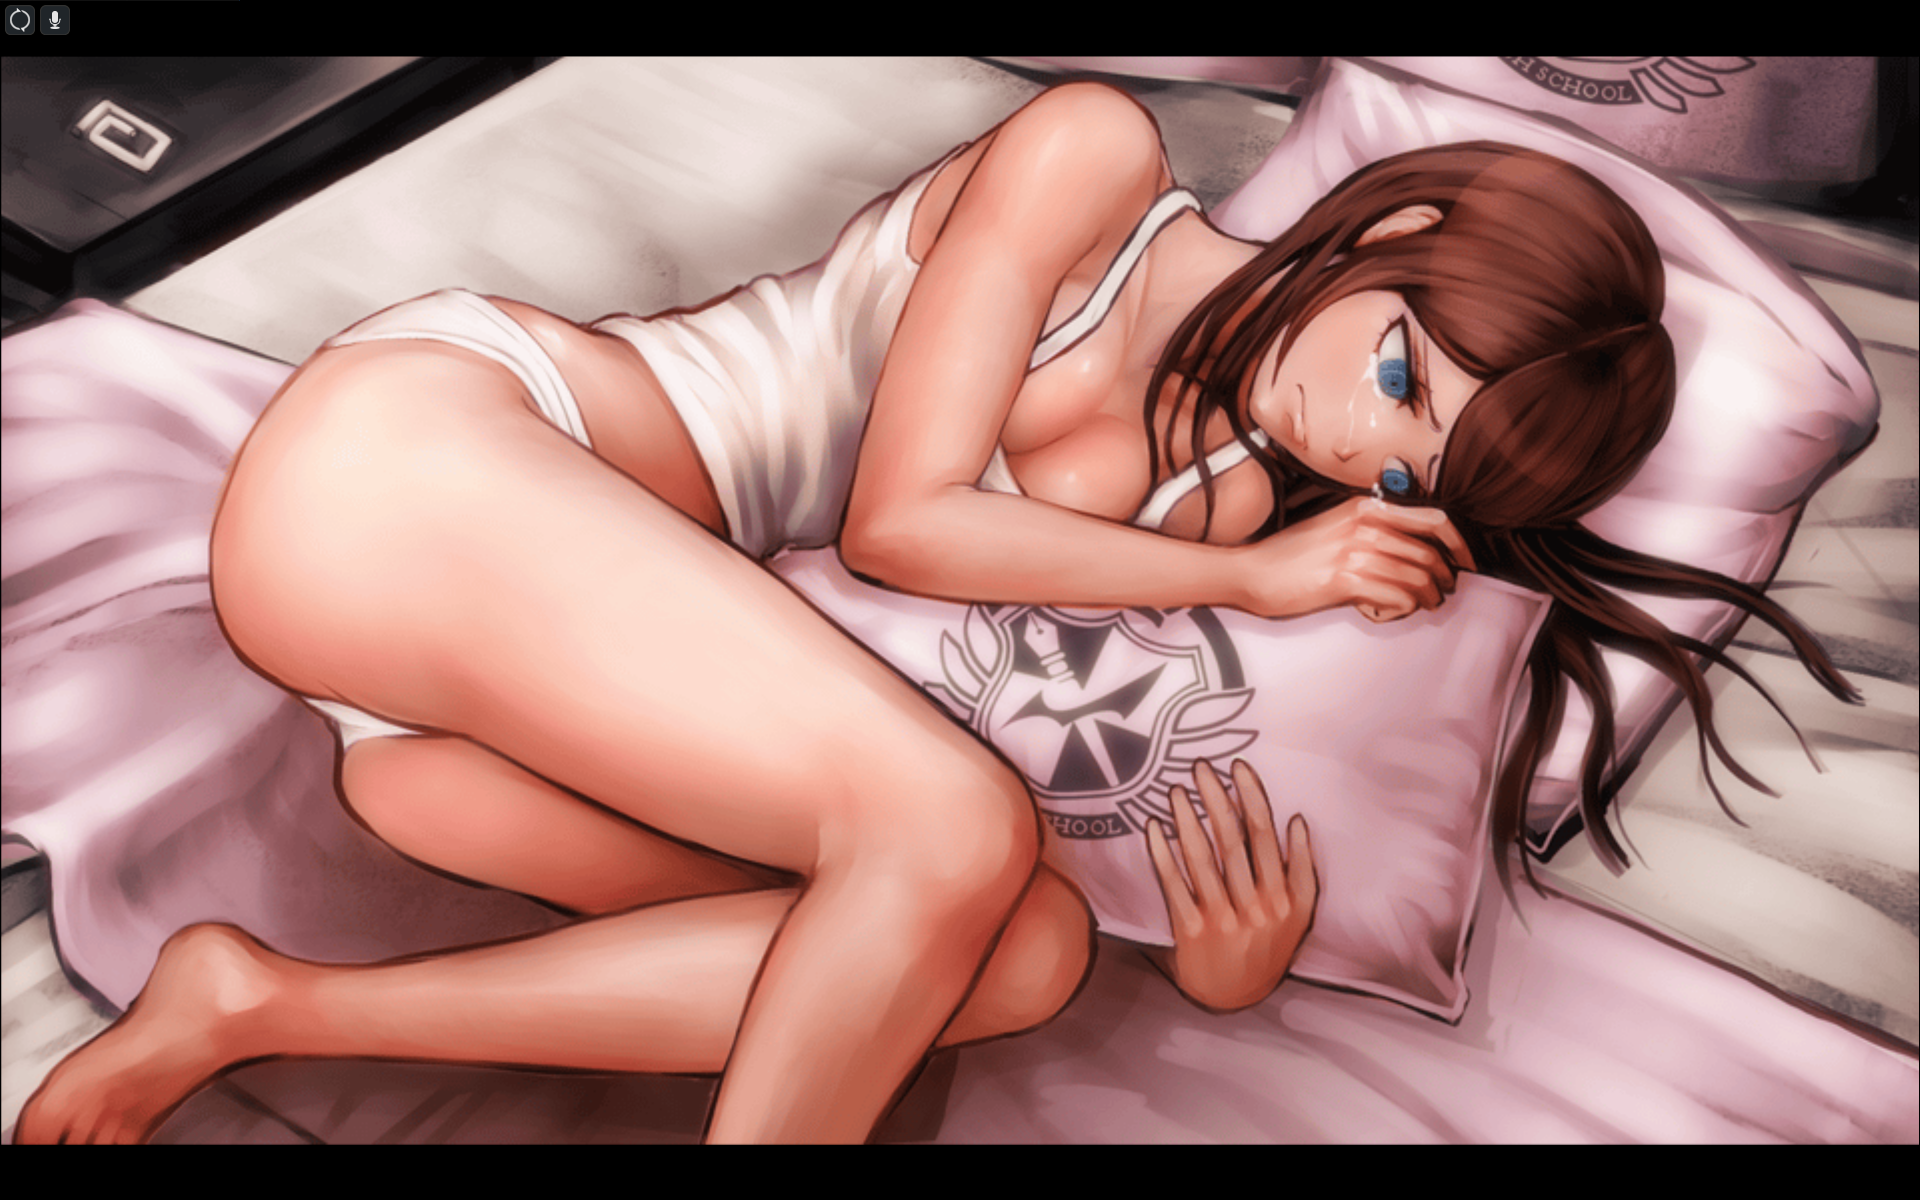 Anime 1920x1200 Danganronpa crying in bed Aoi Asahina anime ass underwear sad tears bed pillow anime girls brunette thighs legs barefoot lying down